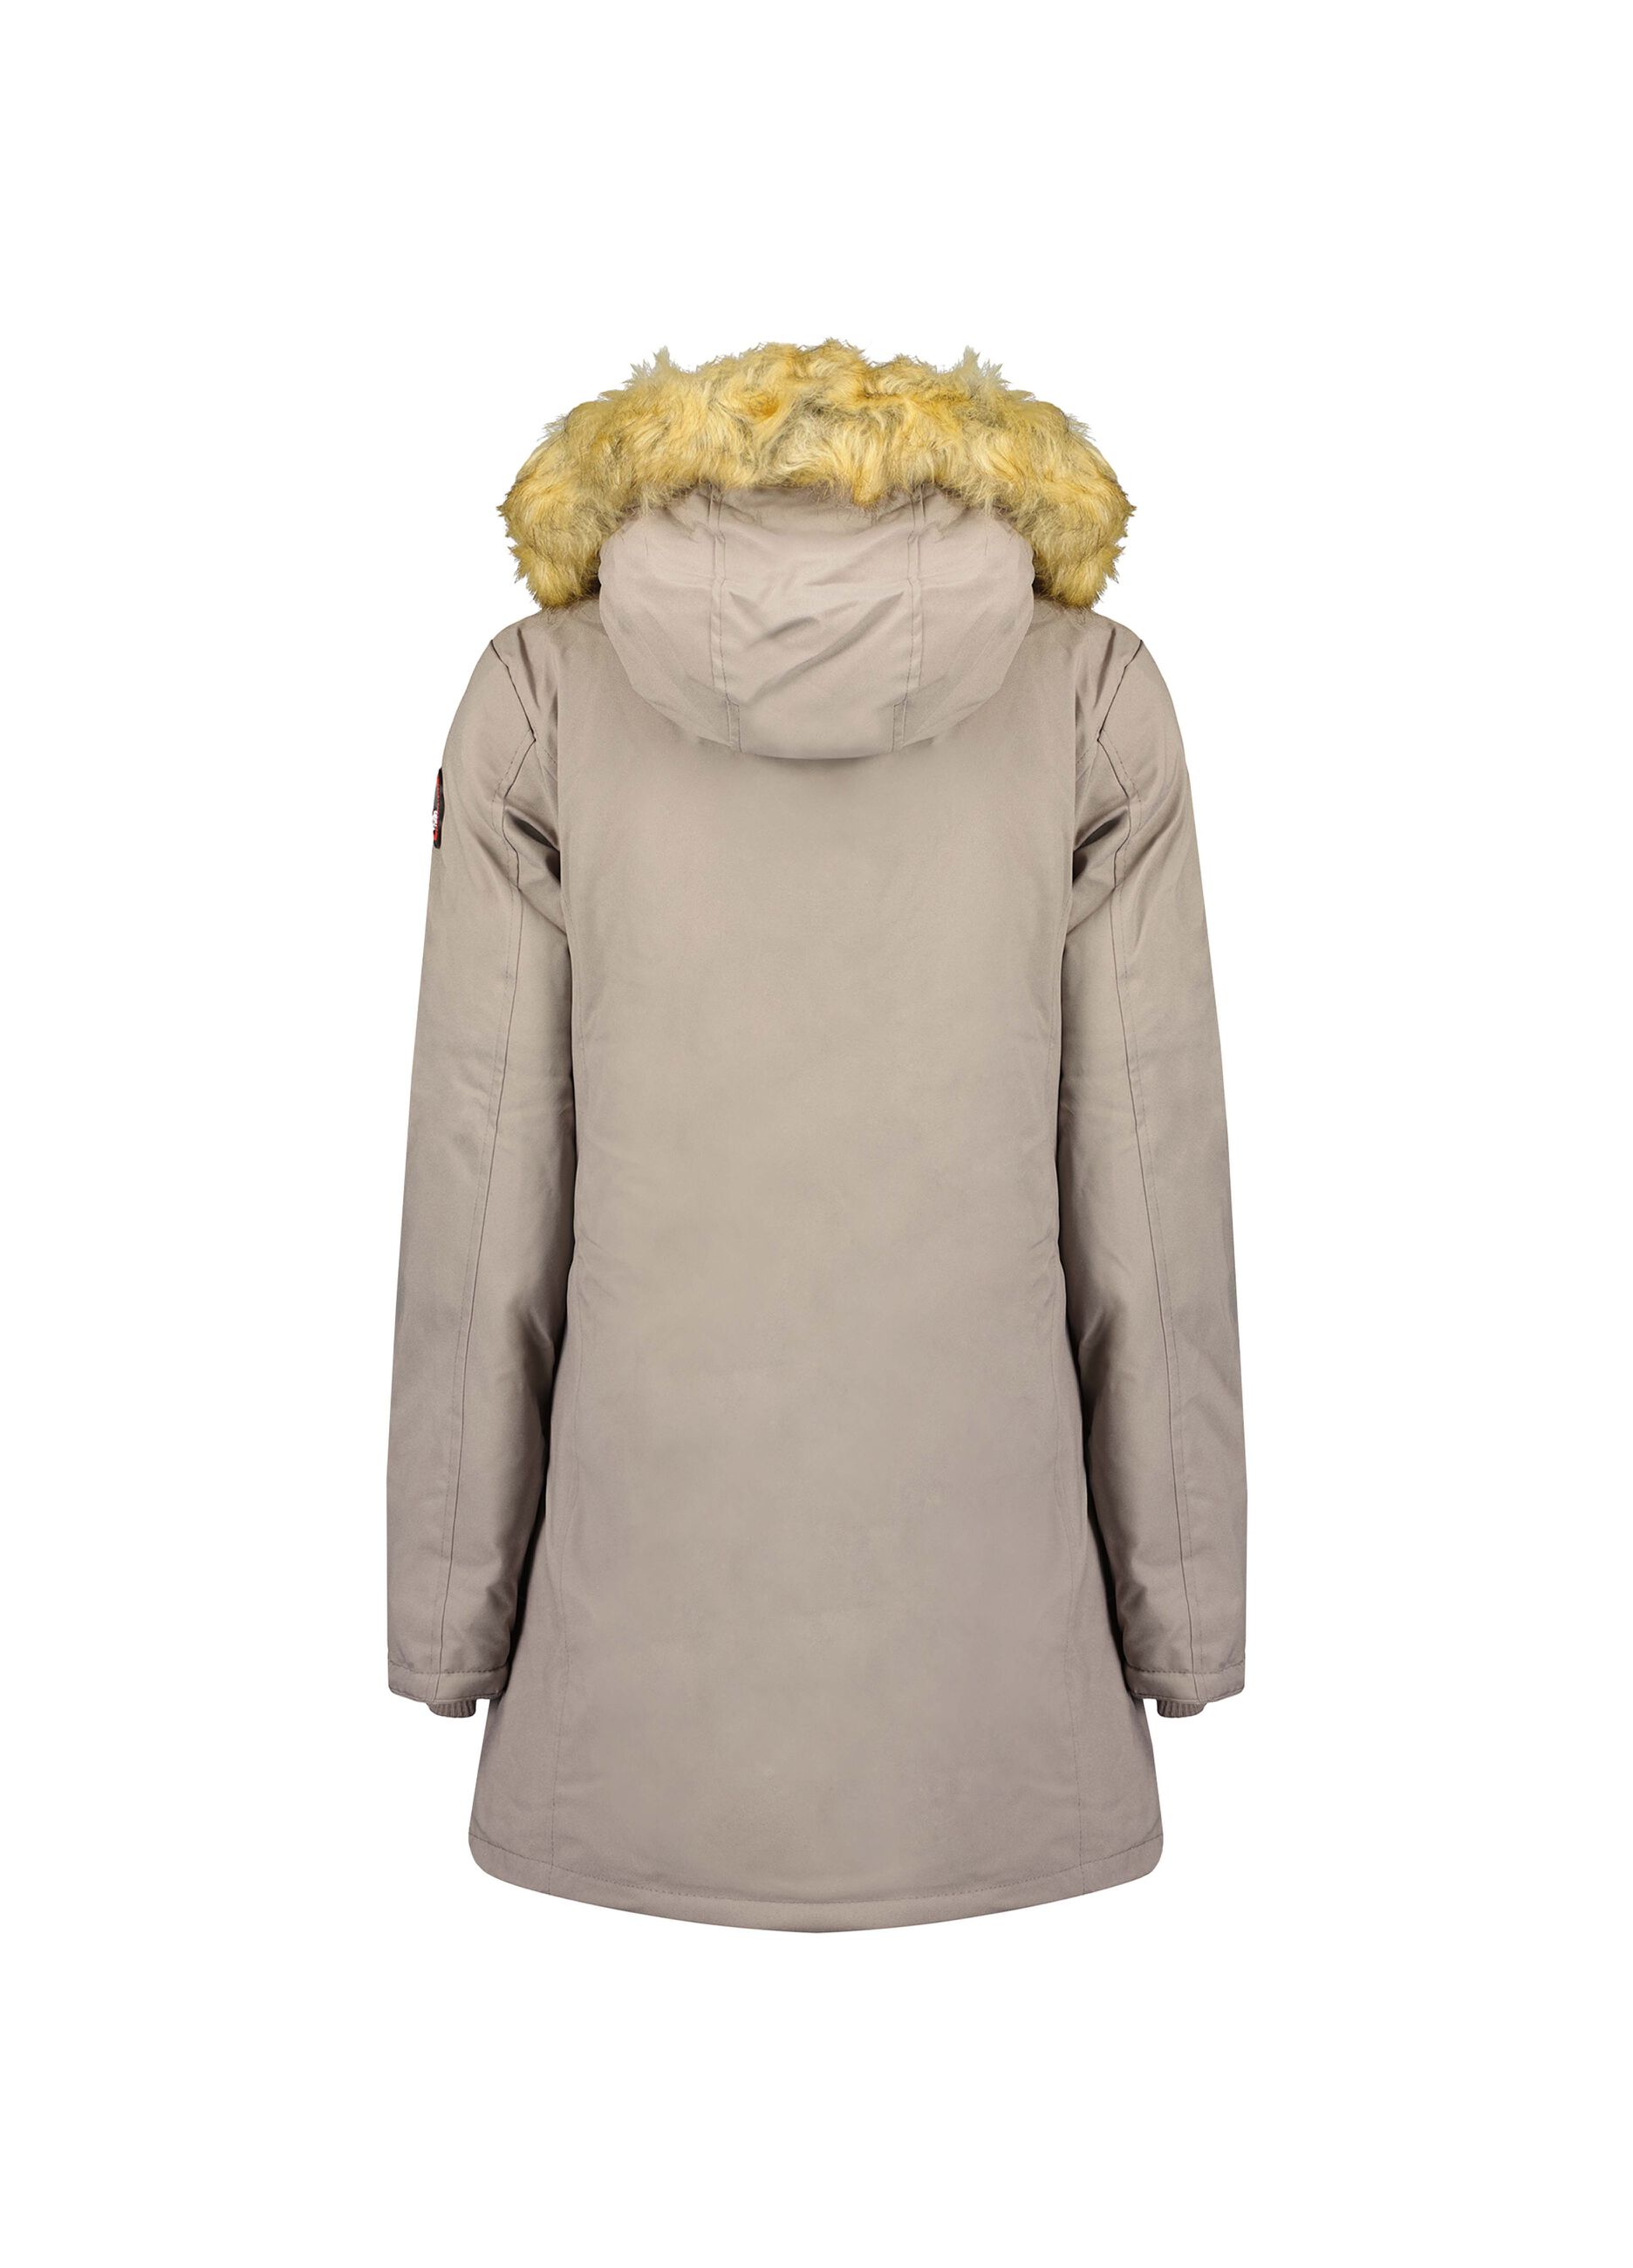 Canadian Peak parka with hood and faux fur